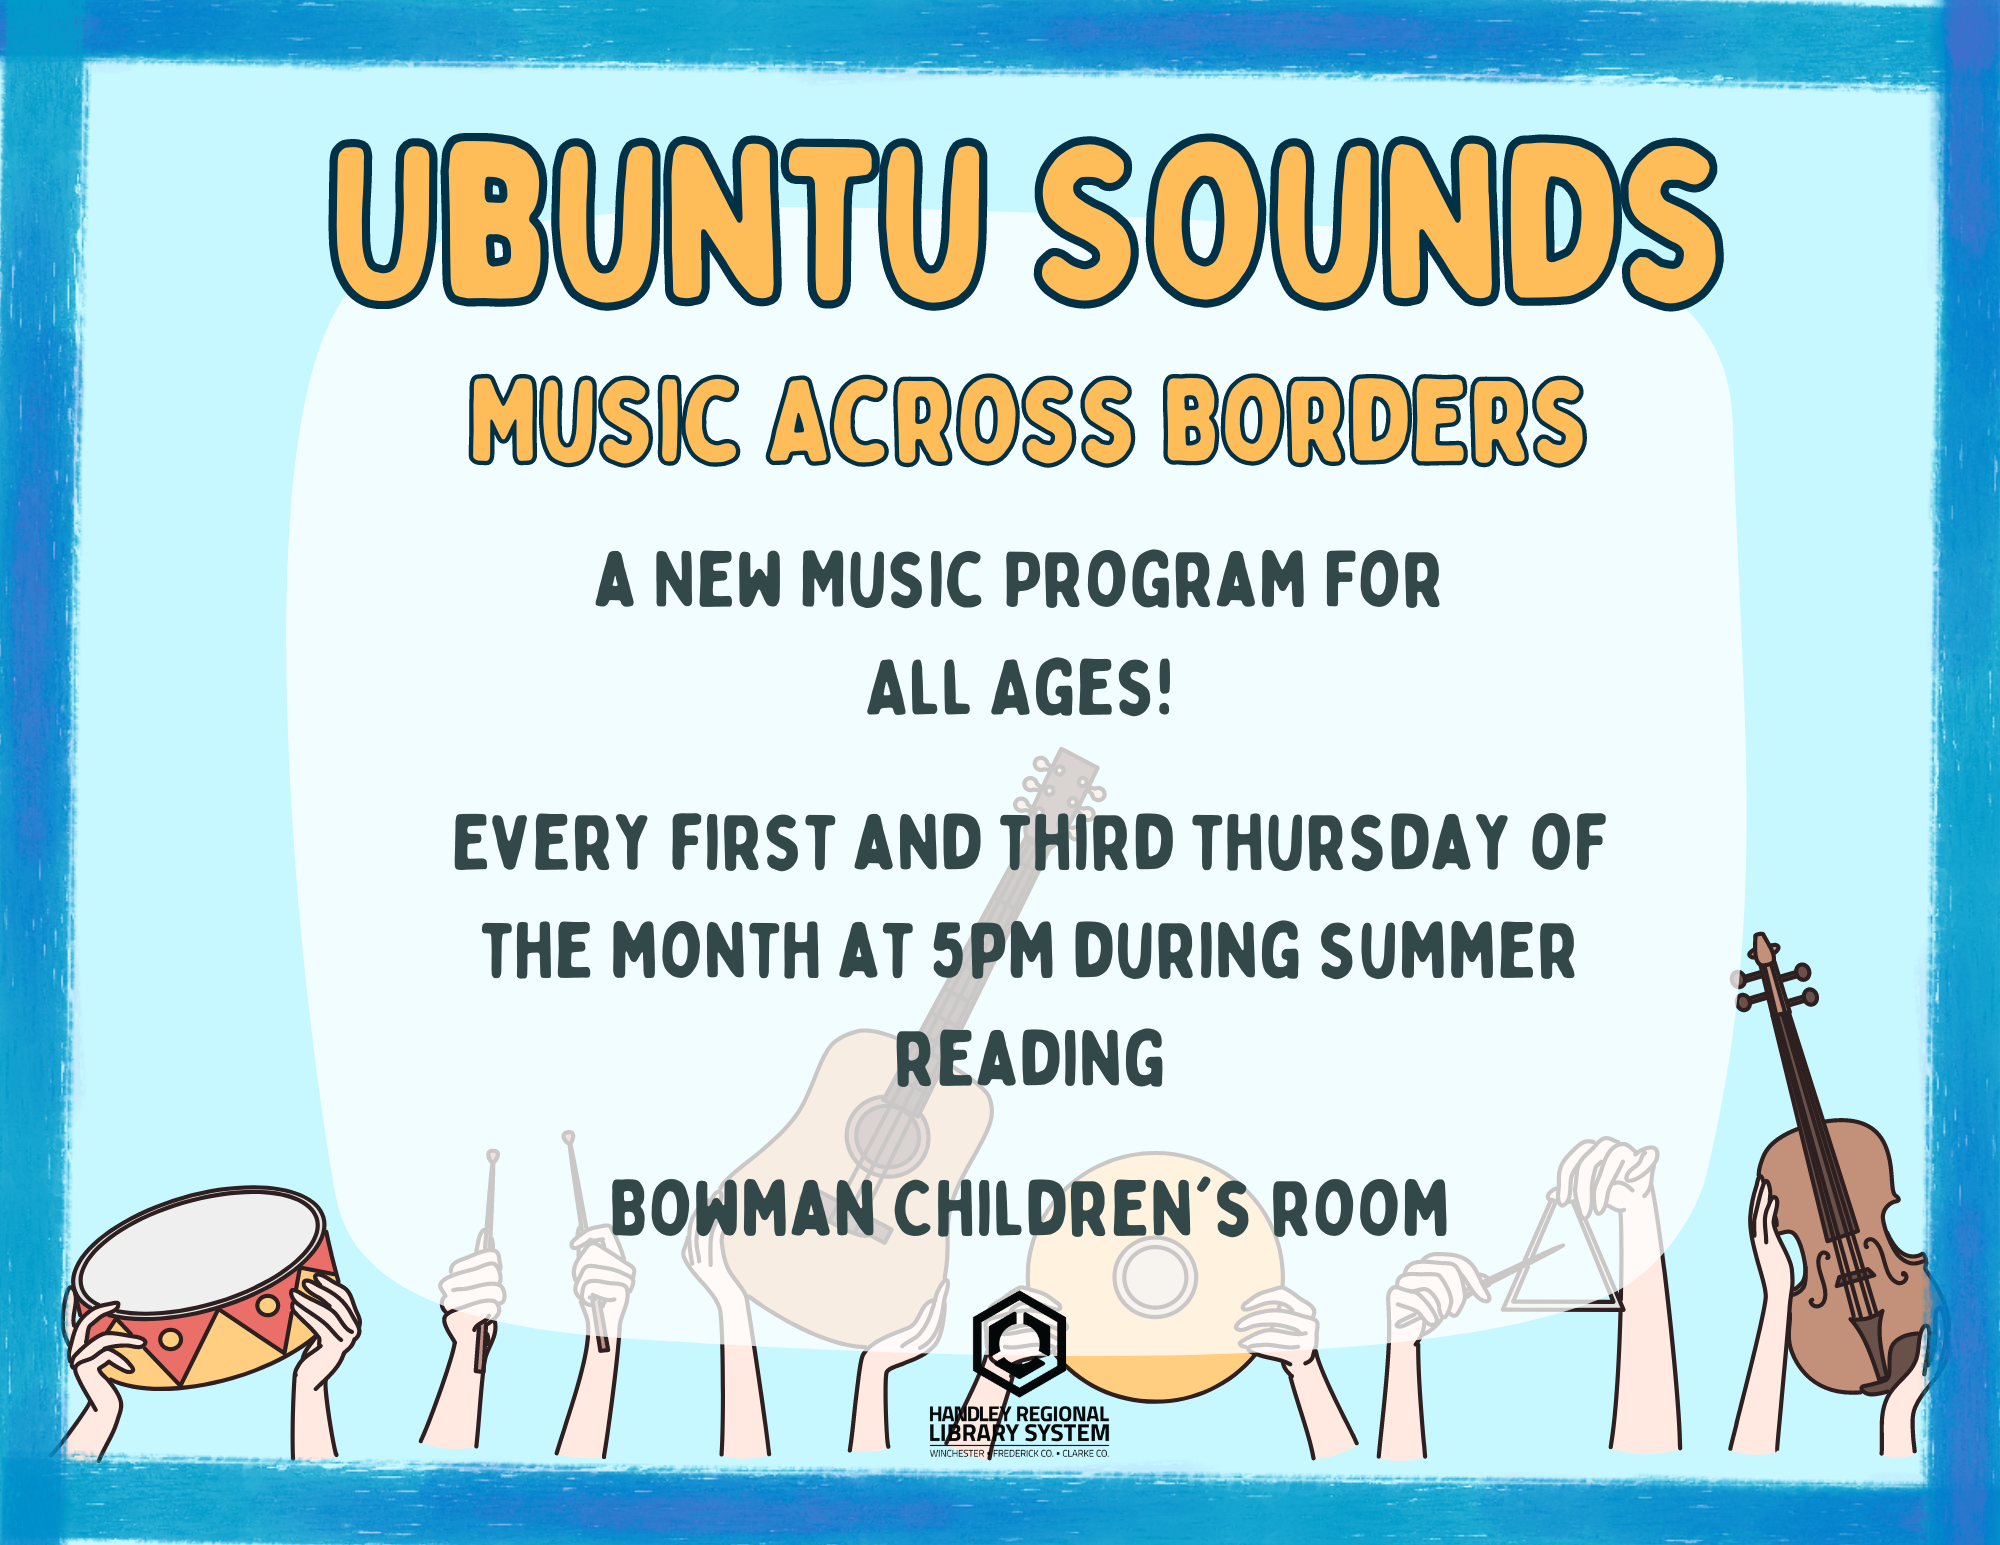 Ubuntu Sounds Promotional Poster with blue background and hands holding instruments along the bottom edge